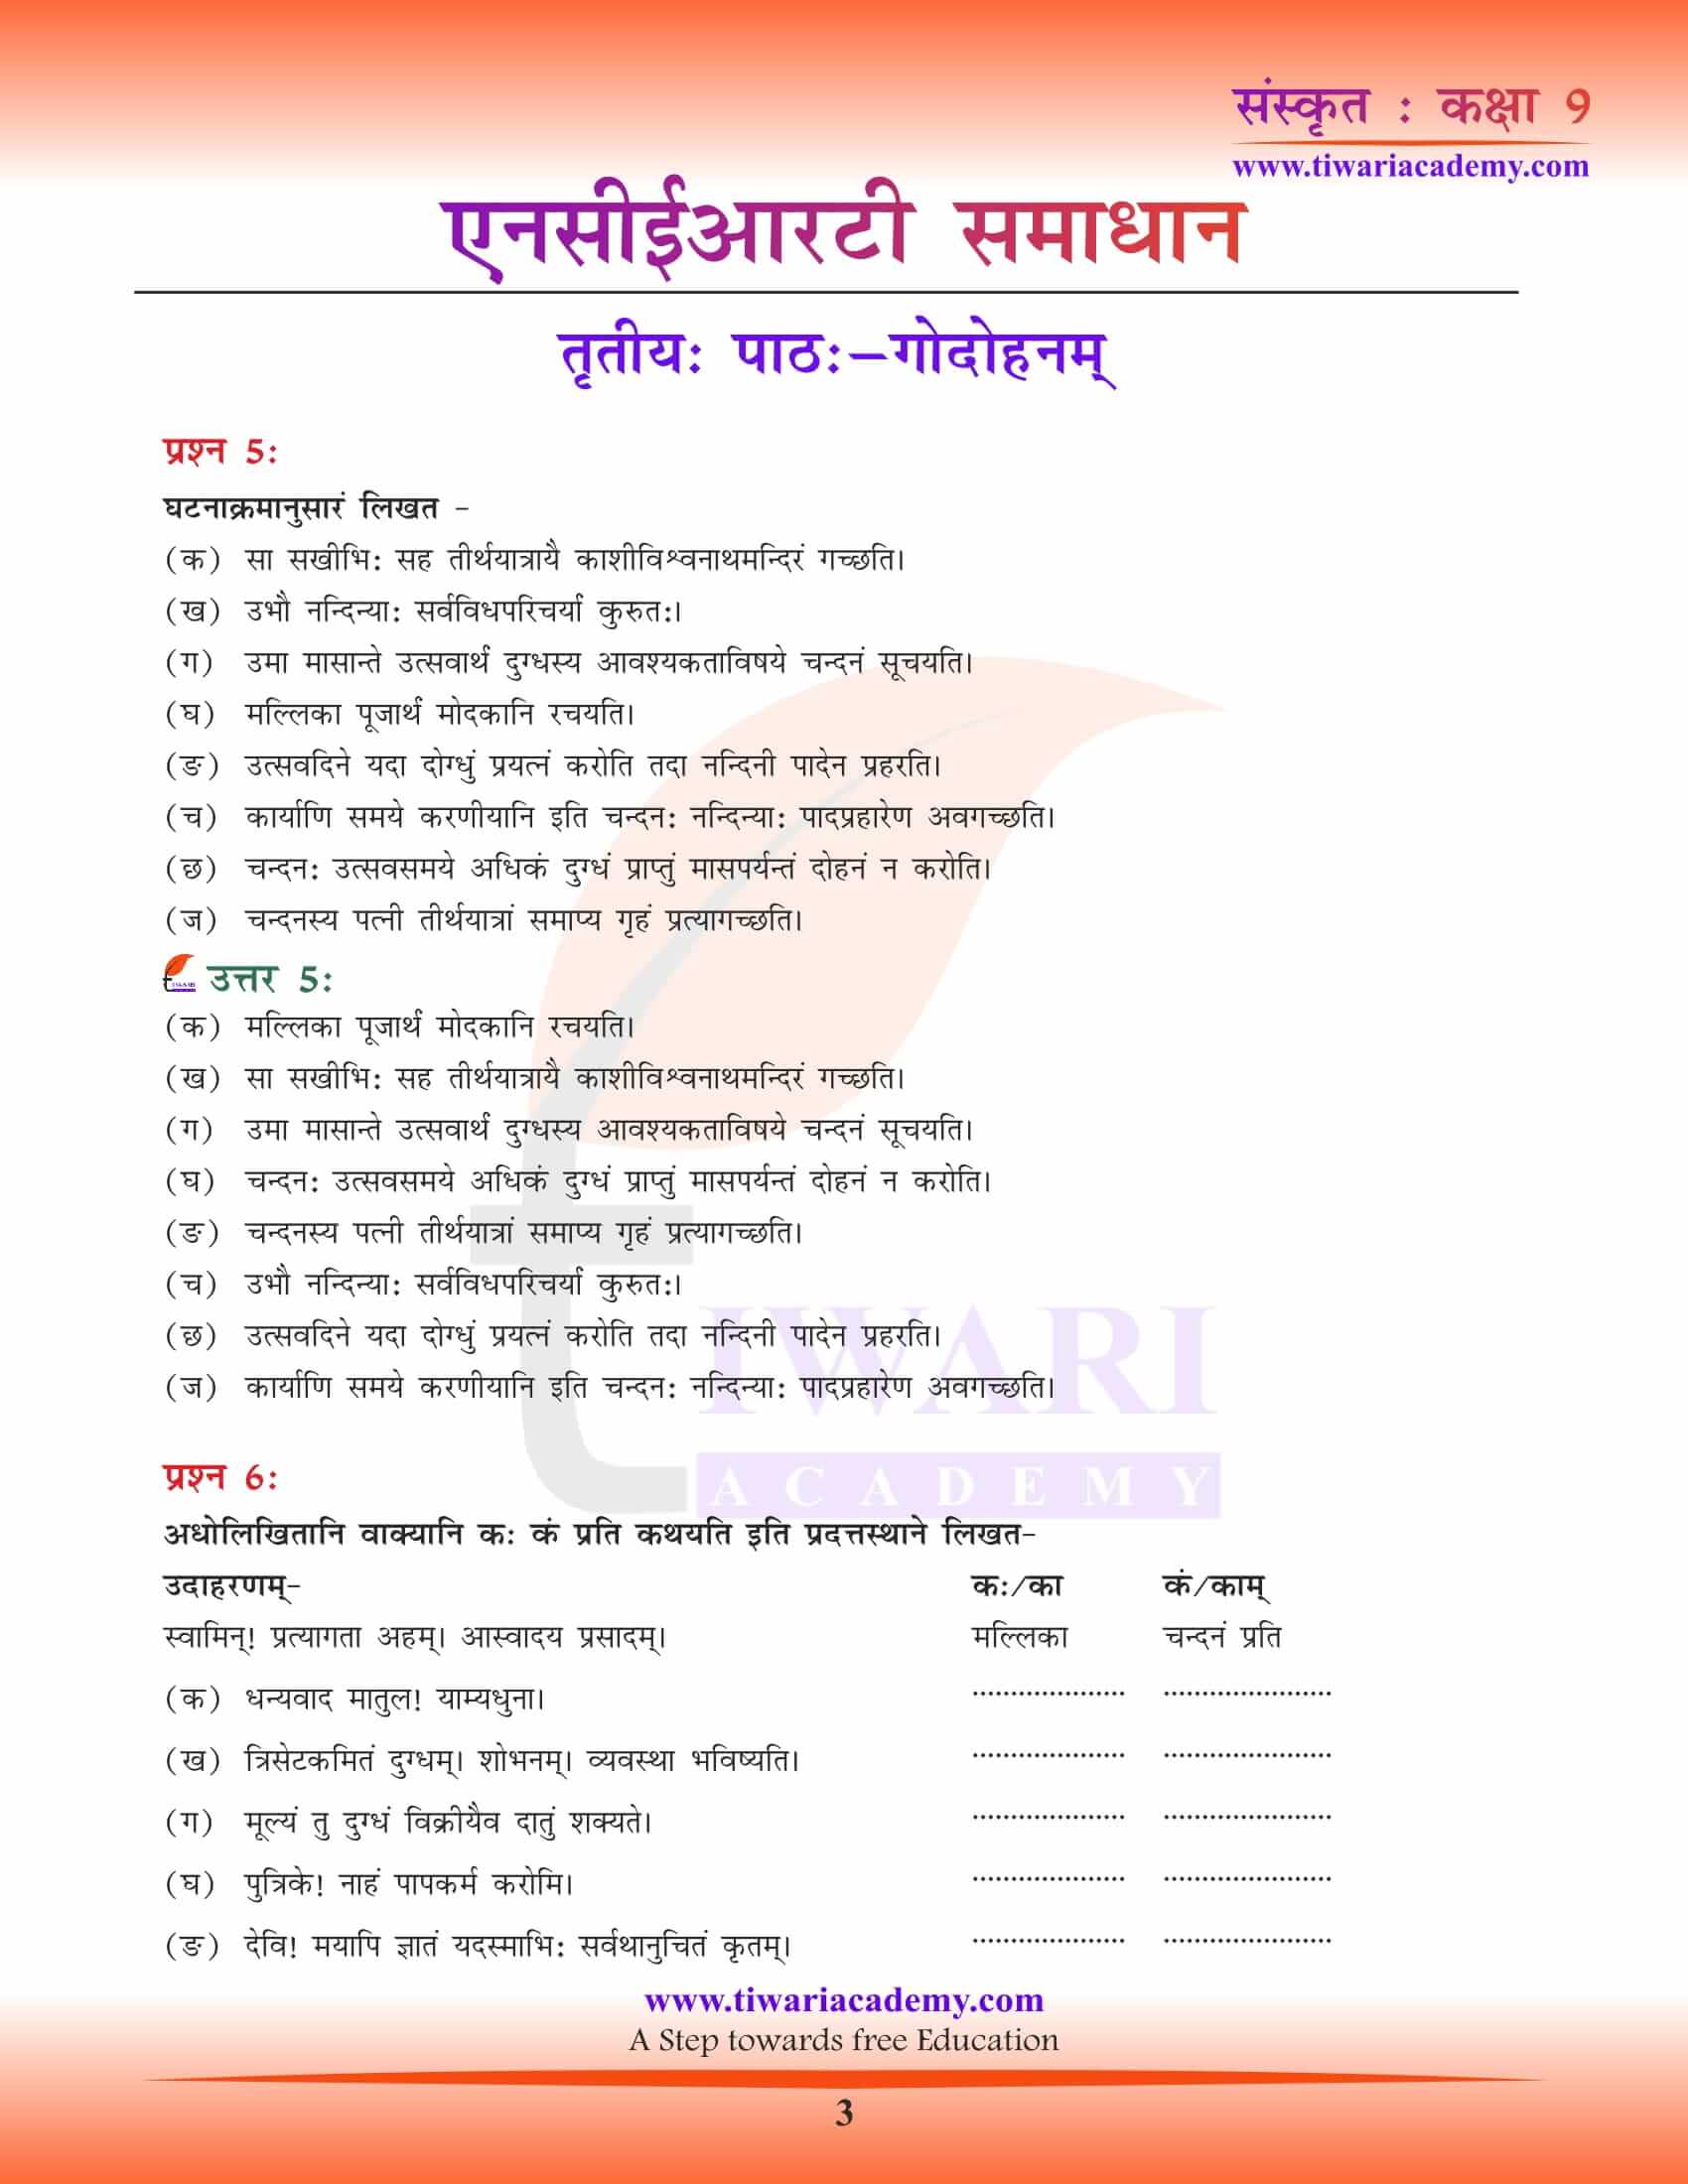 NCERT Solutions for class 9 Sanskrit Chapter 3 all answers free